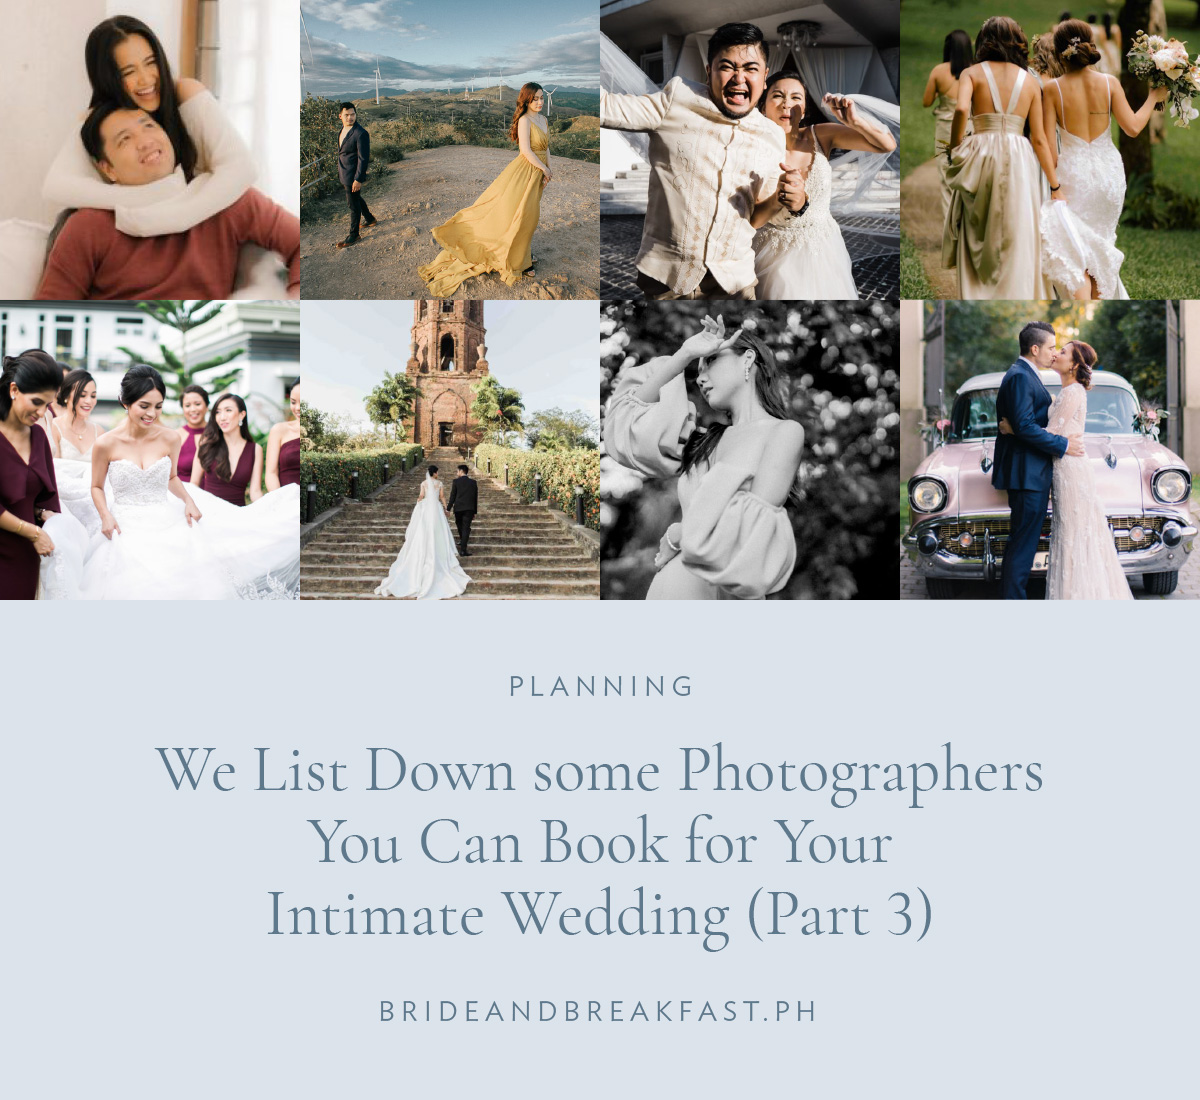 We List Down Some Photographers You Can Book for Your Intimate Wedding (Part 3)